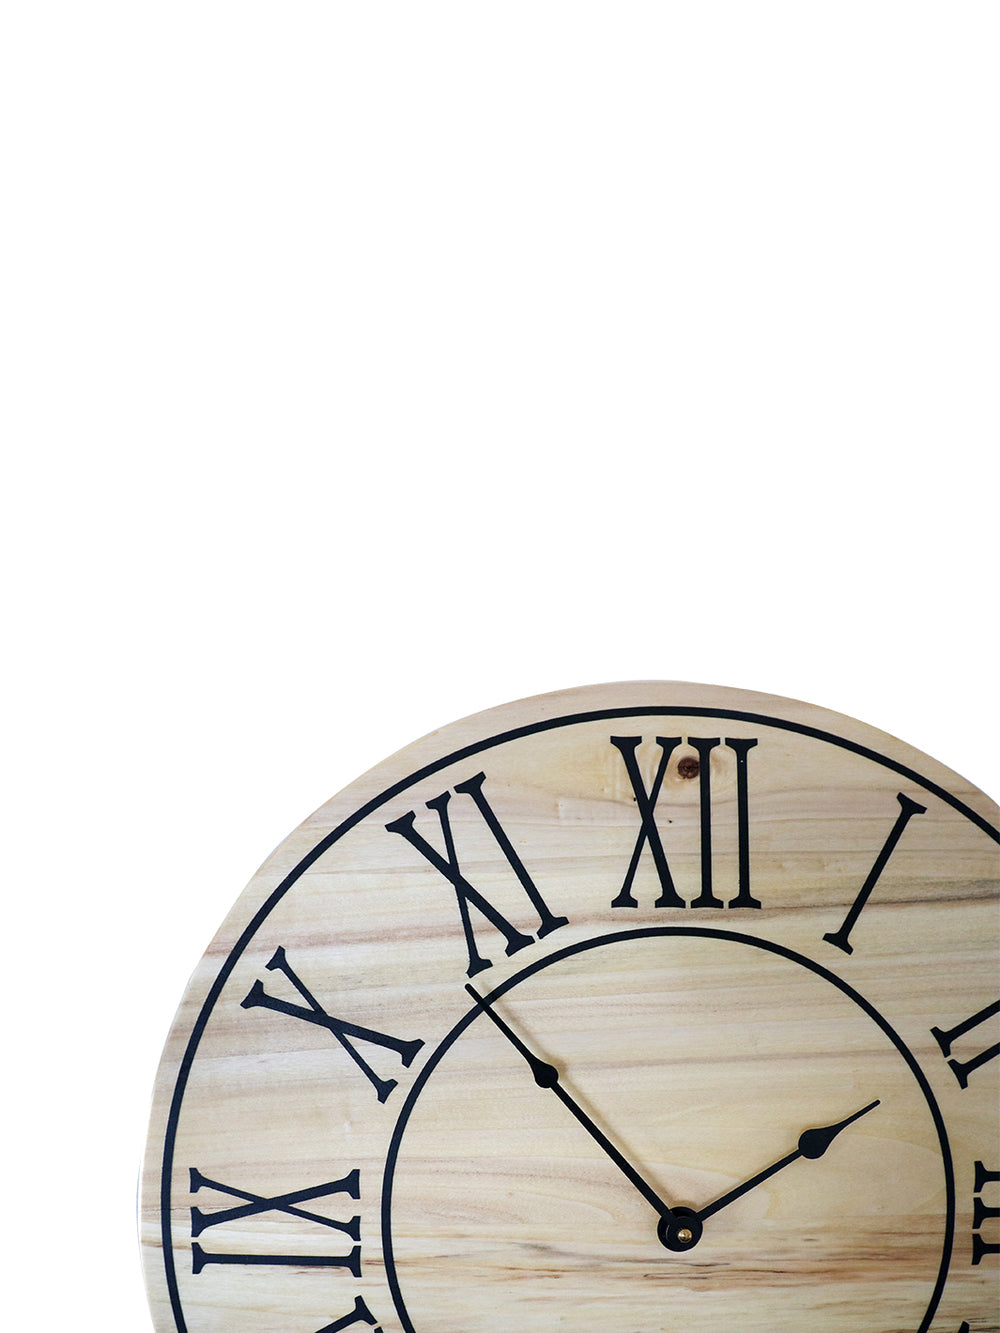 Soft Maple 18" Wood Clock with Black Roman Numerals (in stock) Earthly Comfort Clocks 1681-1